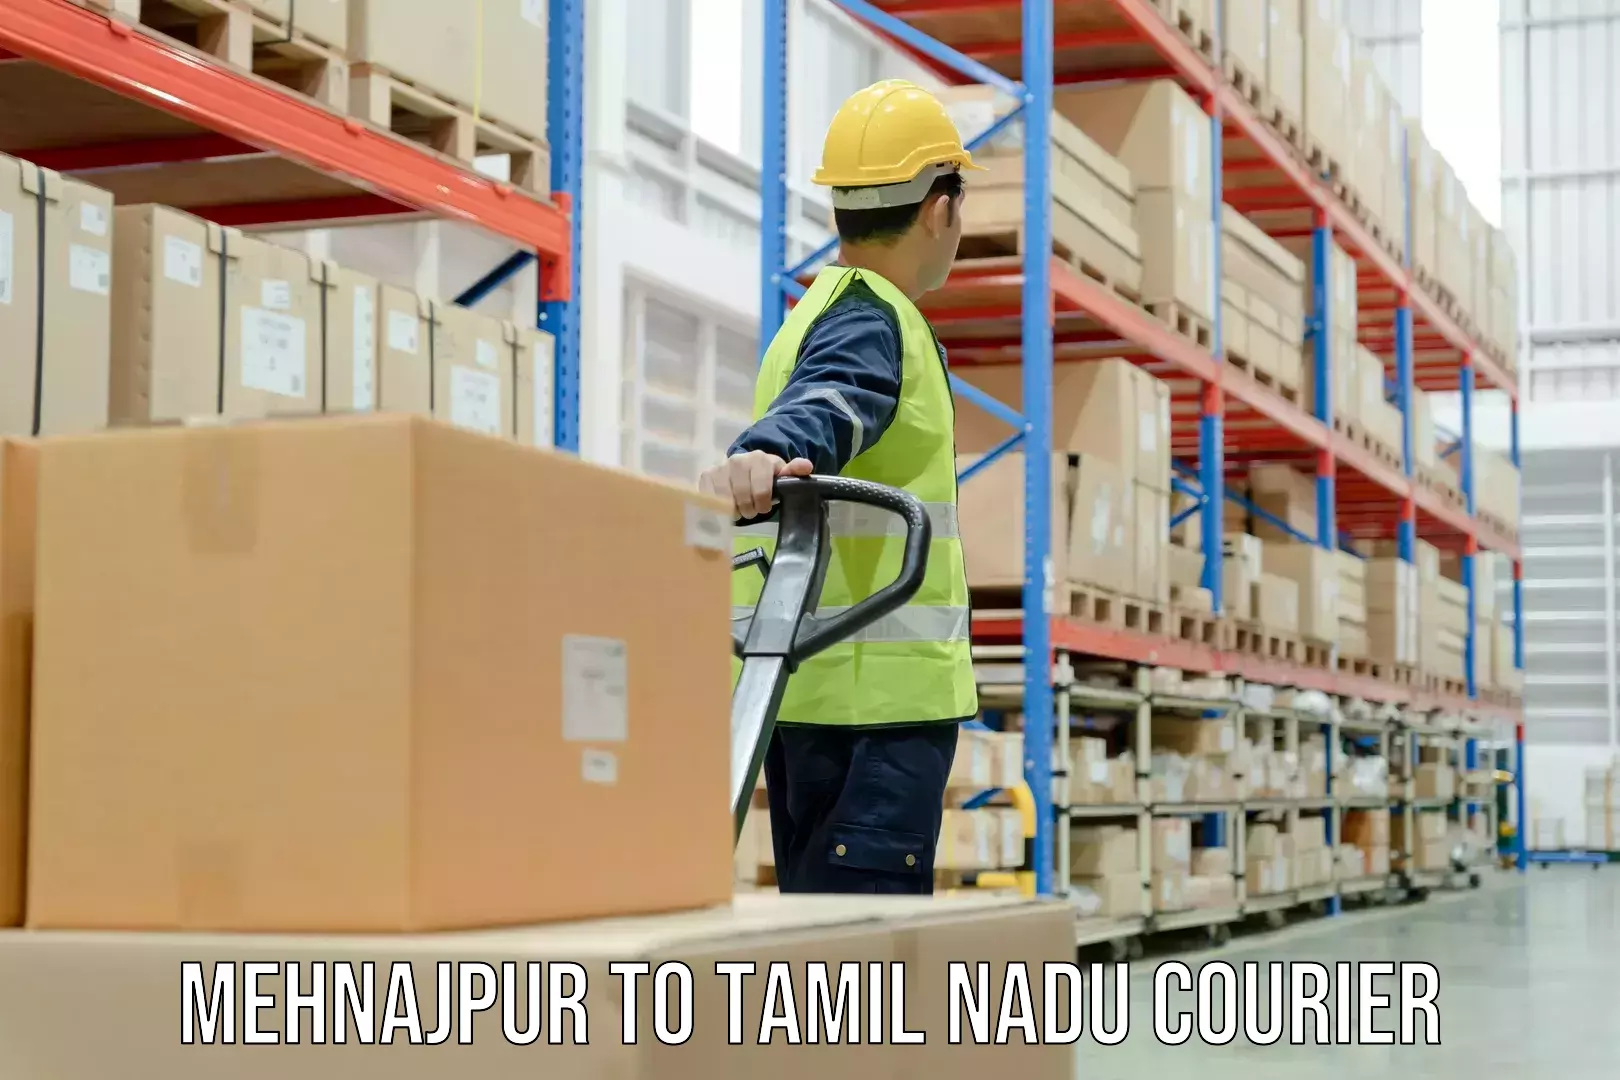 Package delivery network Mehnajpur to Tamil Nadu